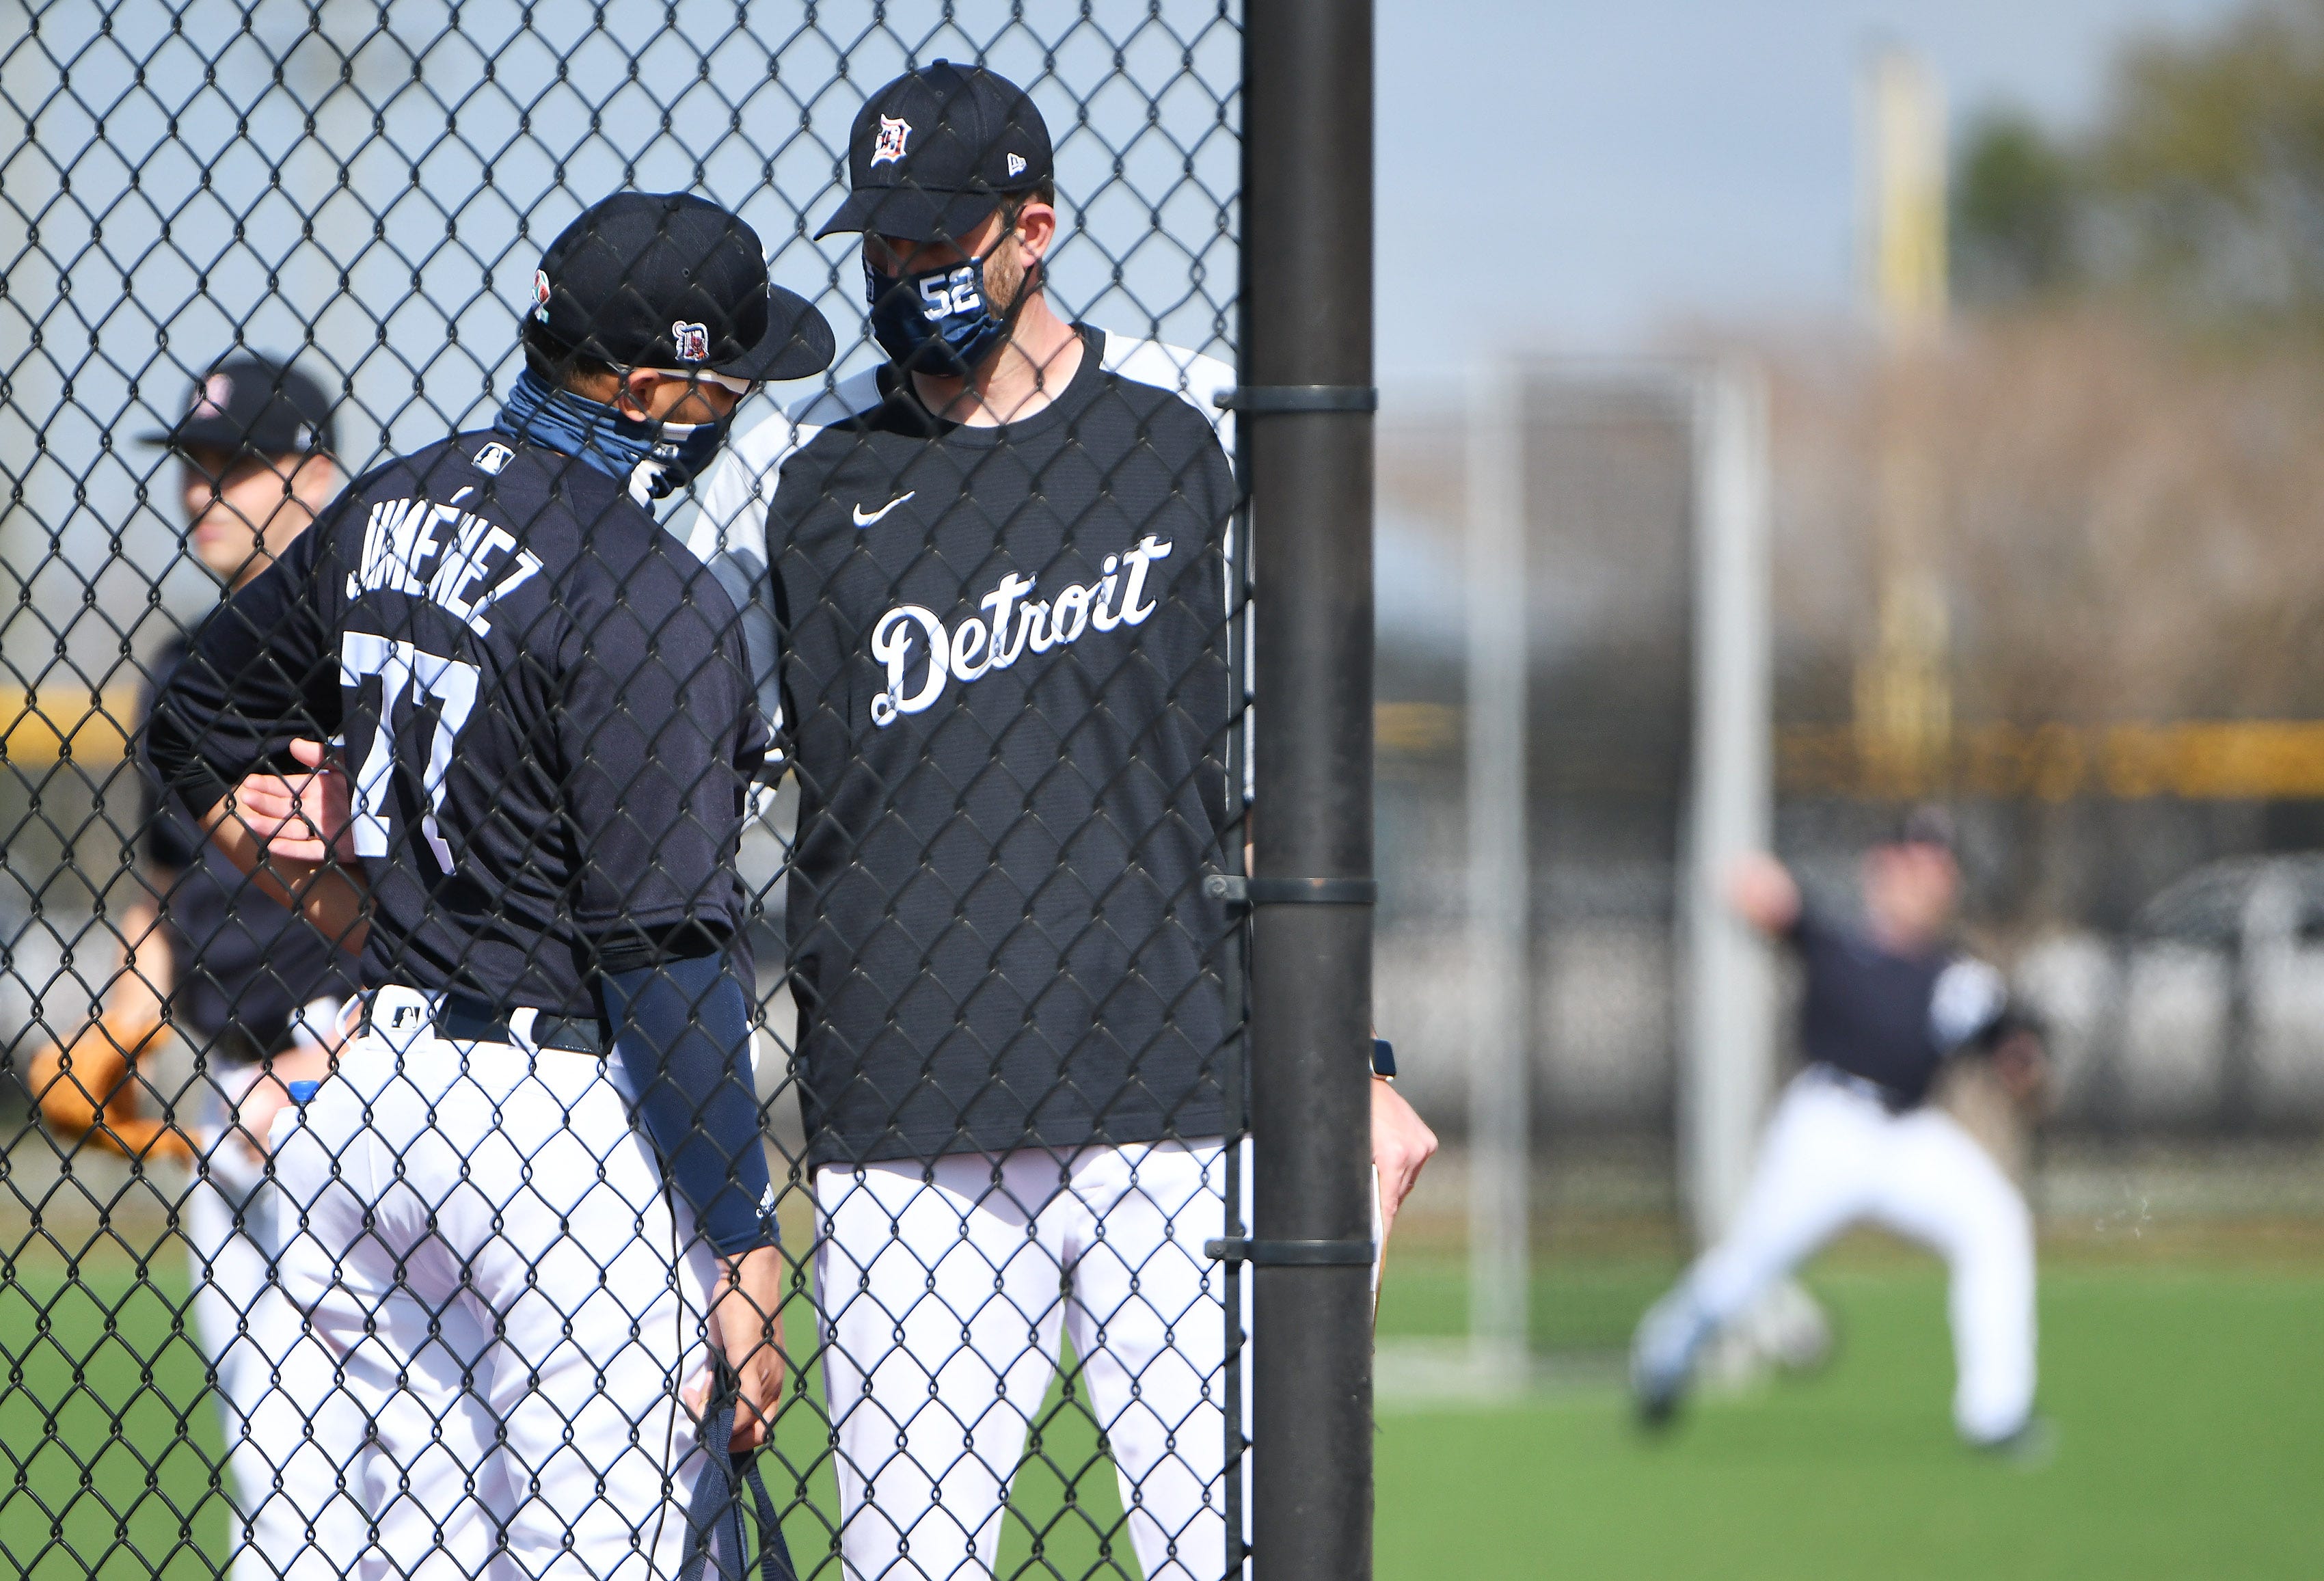 Tigers pitching coach Chris Fetter, right, talks with pitcher Joe Jimenez at the Detroit Tigers workout in Lakeland, Florida, on Feb. 24, 2021.